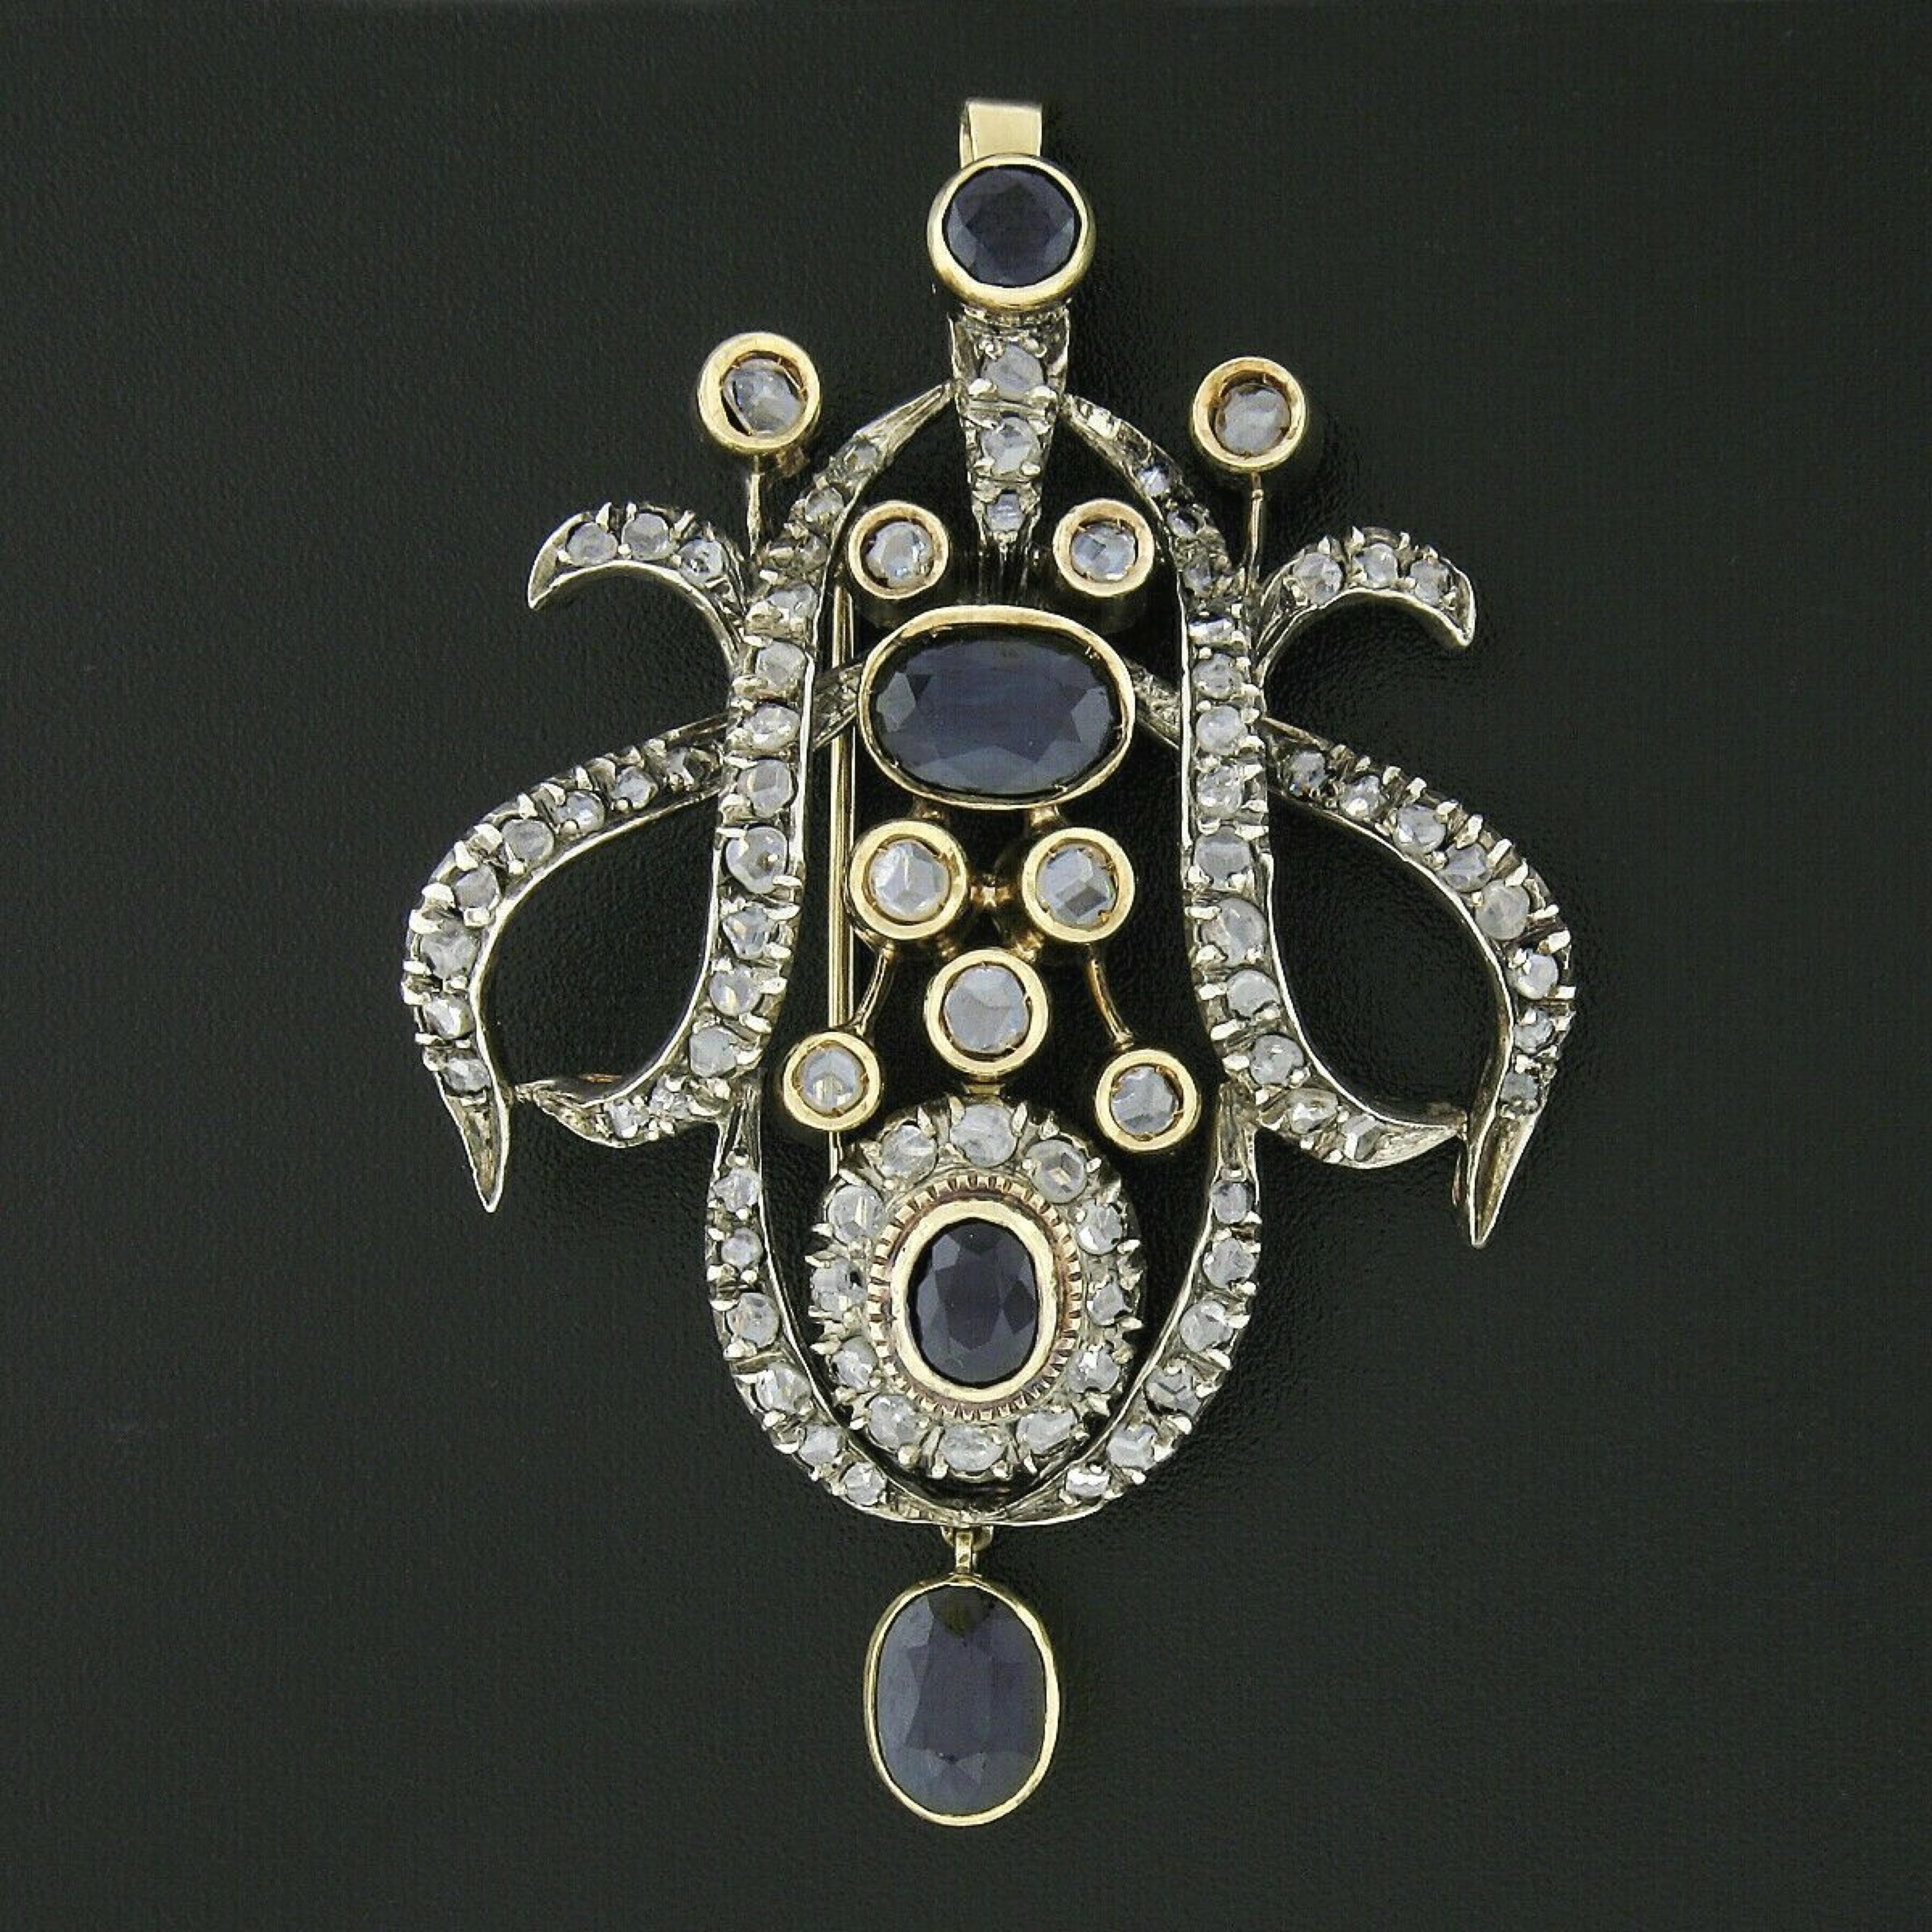 Here we have an absolutely breathtaking antique brooch or pendant that was crafted from solid 18k yellow gold and silver during the early Victorian era. It features magnificent and truly elegant, large, open design that is completely drenched with